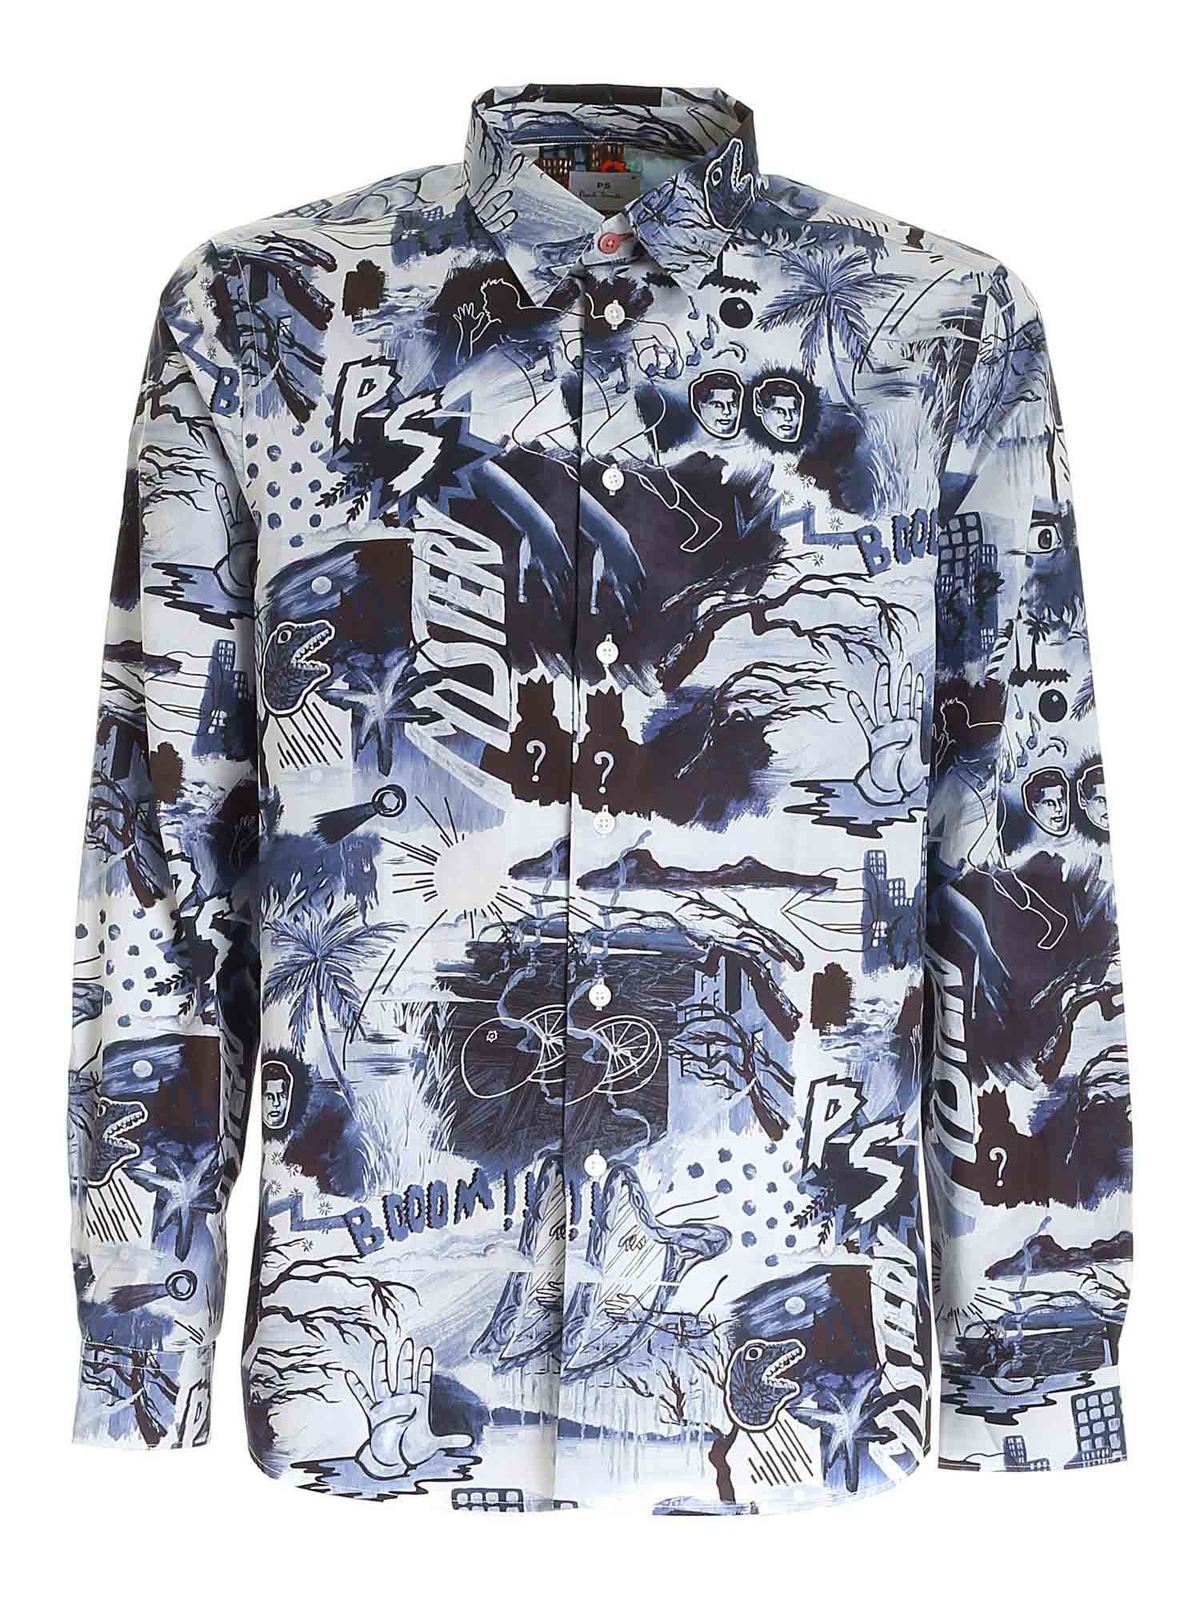 PS BY PAUL SMITH PRINTED SHIRT IN BLUE AND LIGHT BLUE